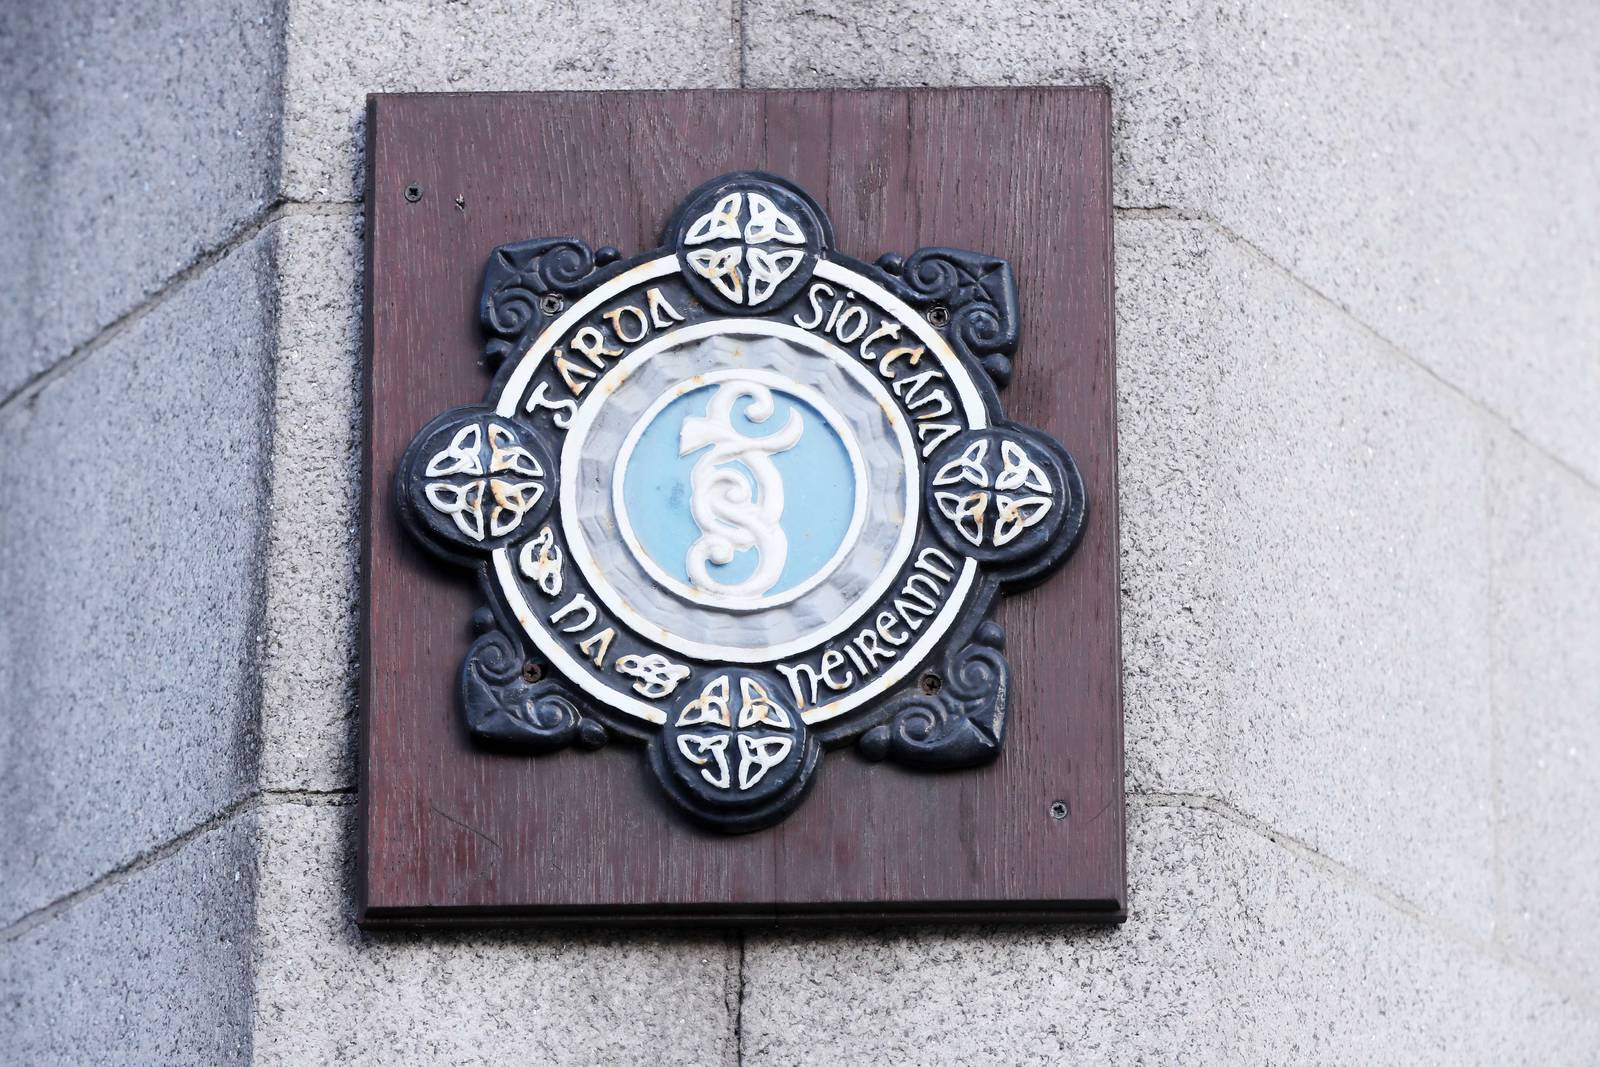 FILE GARDA STOCK

A stock picture of the Garda badge logo on Dublins Searse Street station.  PRESS ASSOCIATION Photo. Picture date: Wednesday January 16, 2019. Photo credit should read: Niall Carson/PA Wire